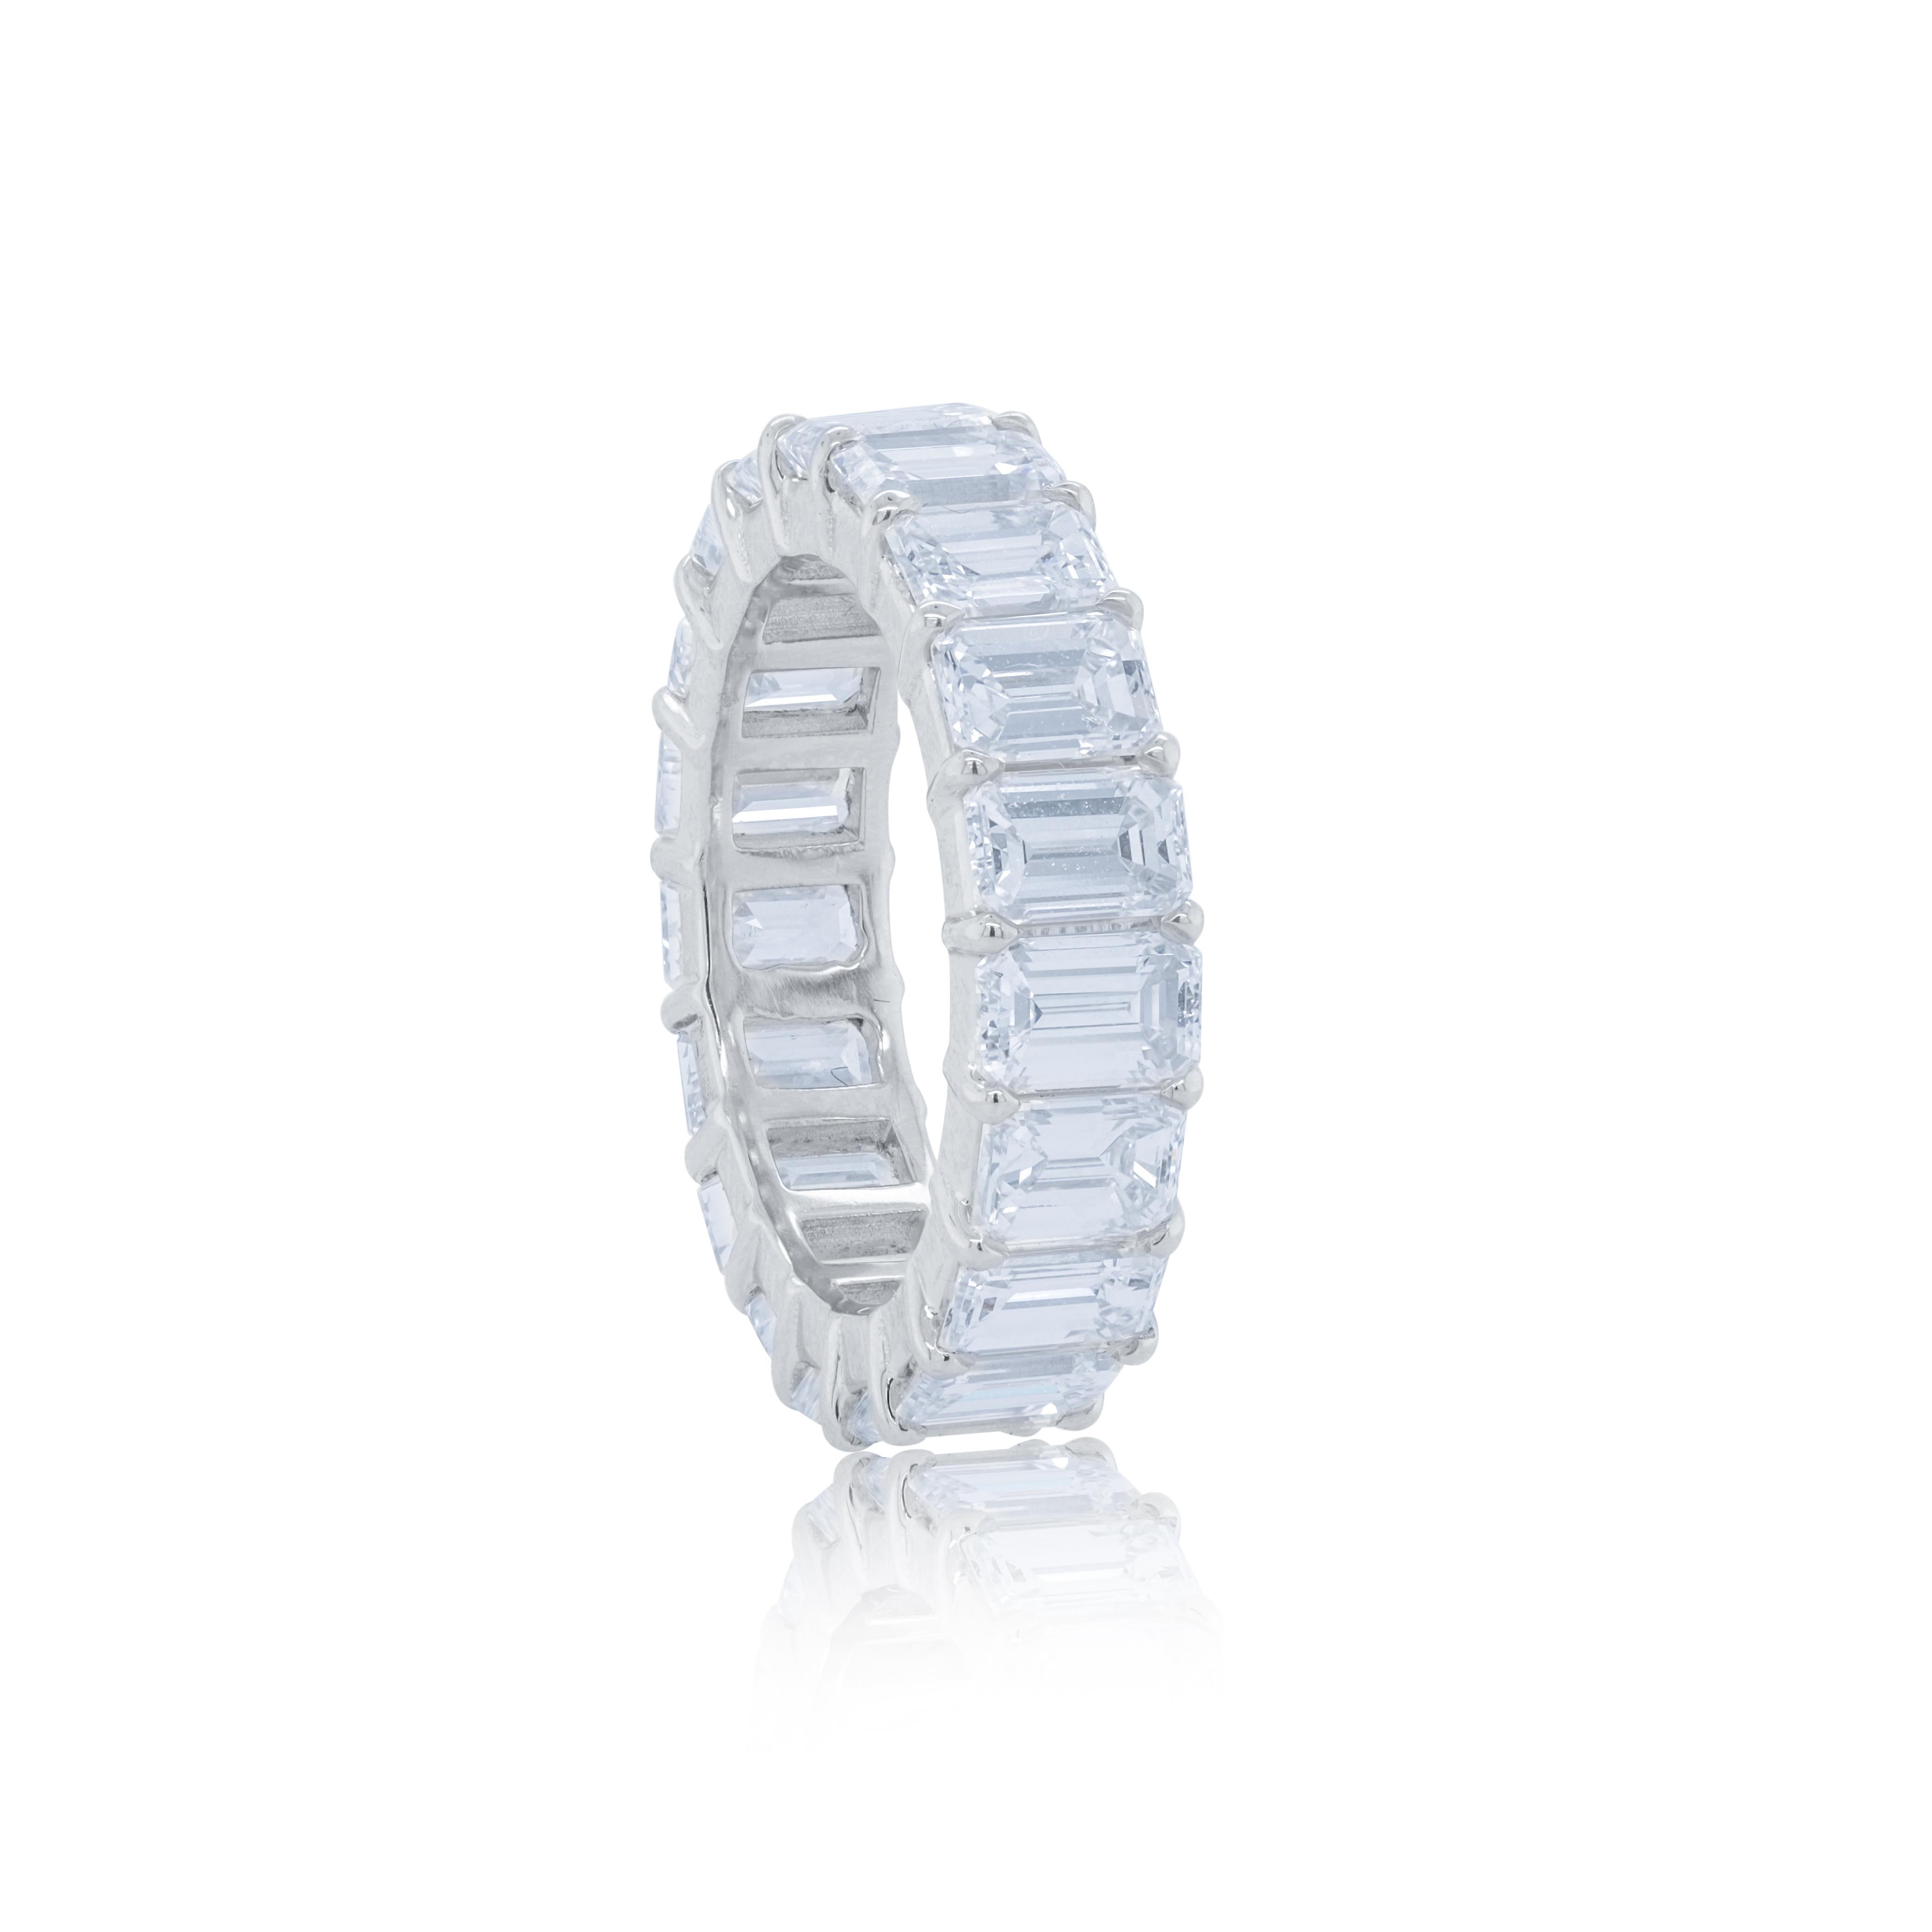 Platinum emerald cut wedding band containing 8.80 cts tw of diamonds (19 stones) 
Diana M. is a leading supplier of top-quality fine jewelry for over 35 years.
Diana M is one-stop shop for all your jewelry shopping, carrying line of diamond rings,